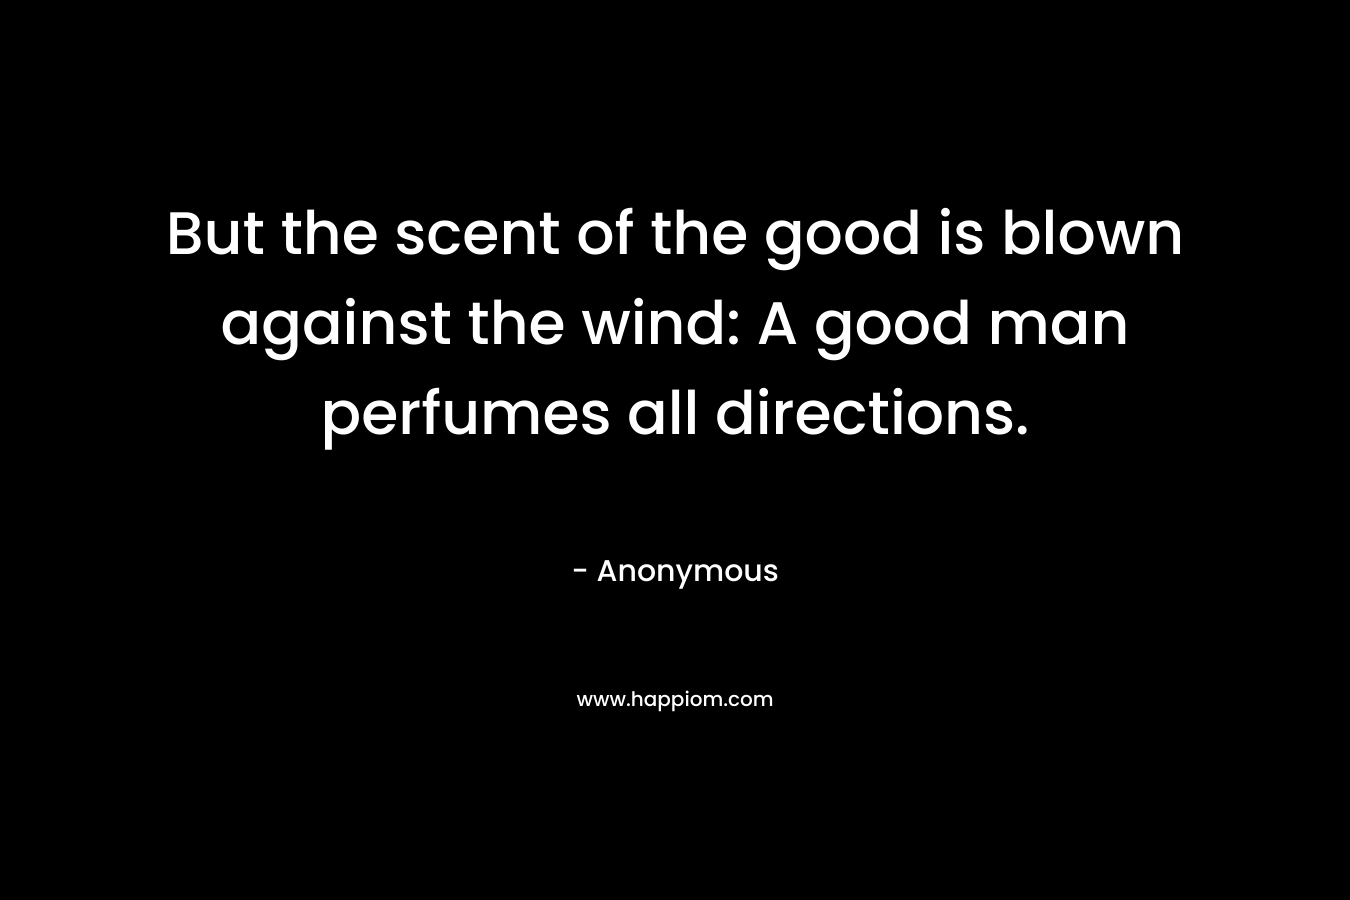 But the scent of the good is blown against the wind: A good man perfumes all directions. – Anonymous